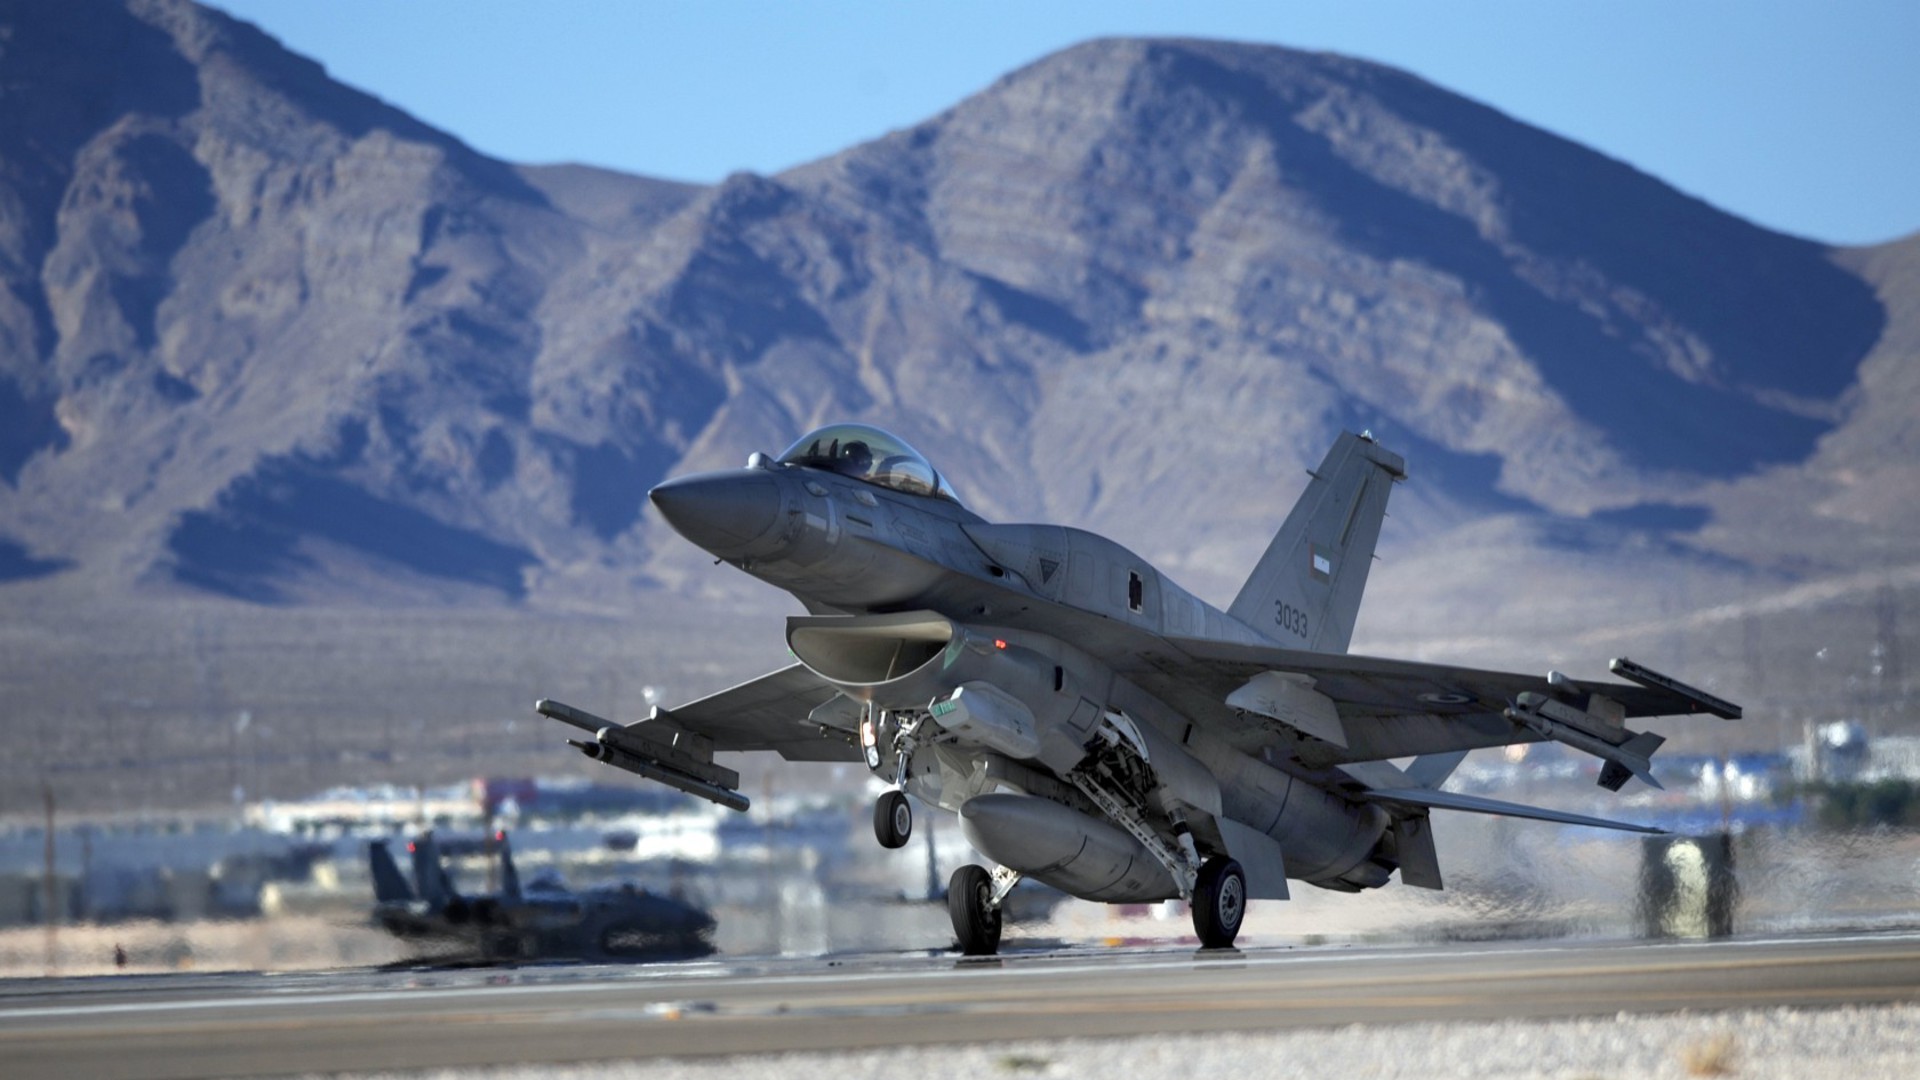 android military, general dynamics f 16 fighting falcon, aircraft, desert, jet, takeoff, jet fighters